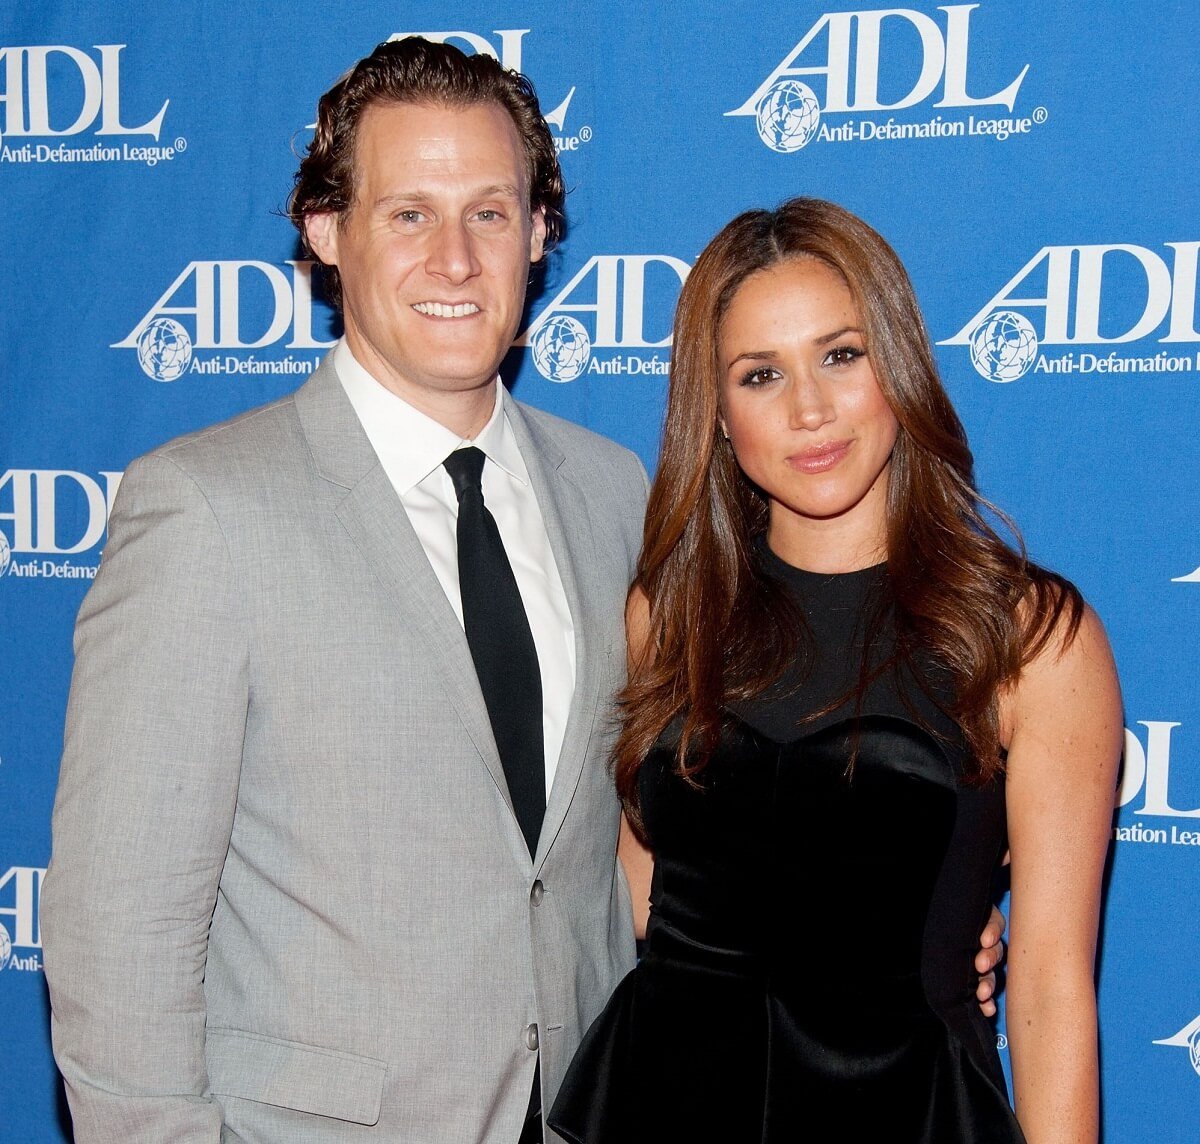 Meghan Markle and her ex-husband, Trevor Engelson, on the red carpet at the Anti-Defamation League Entertainment Industry Awards Dinner